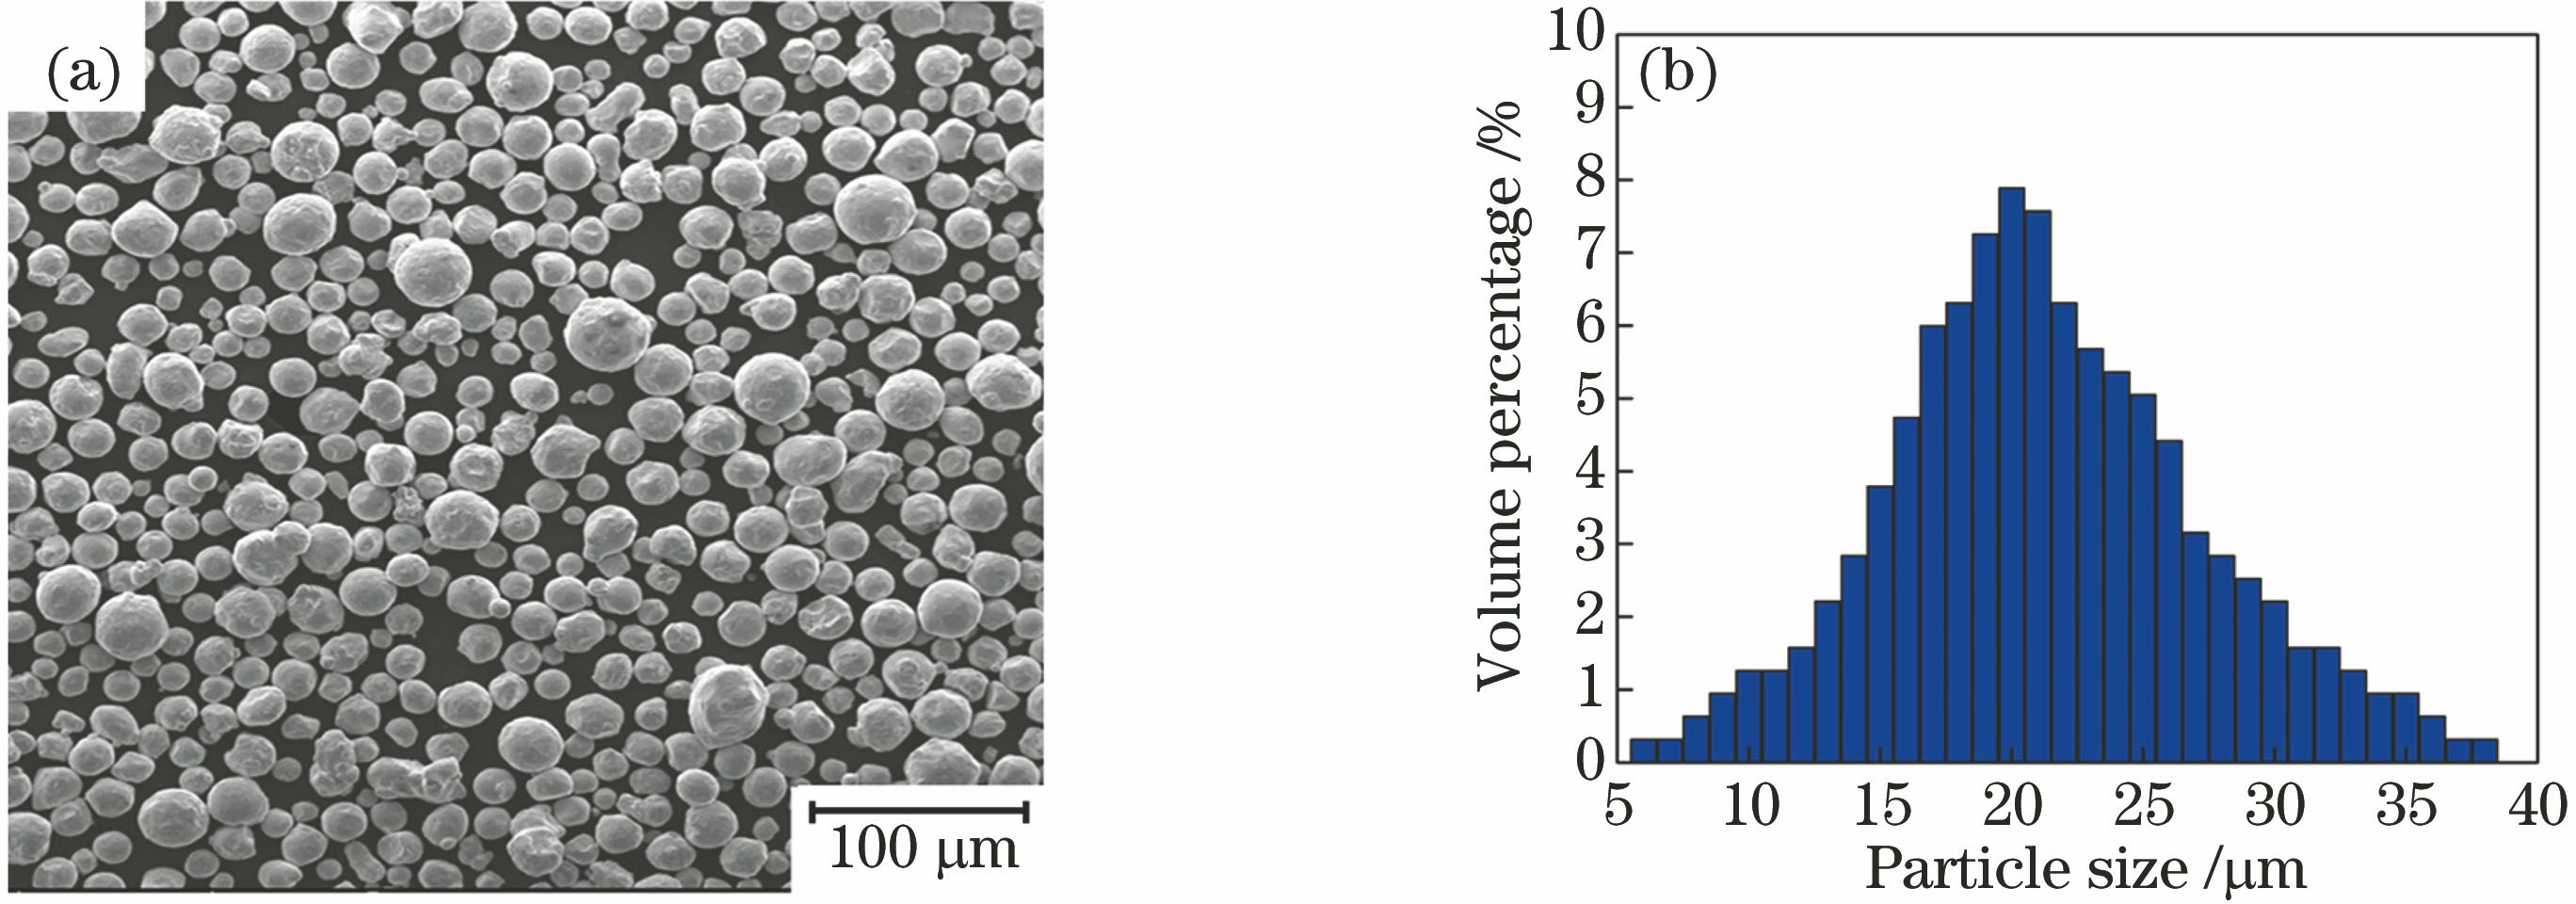 316L stainless steel powder. (a) Morphology; (b) particle size distribution